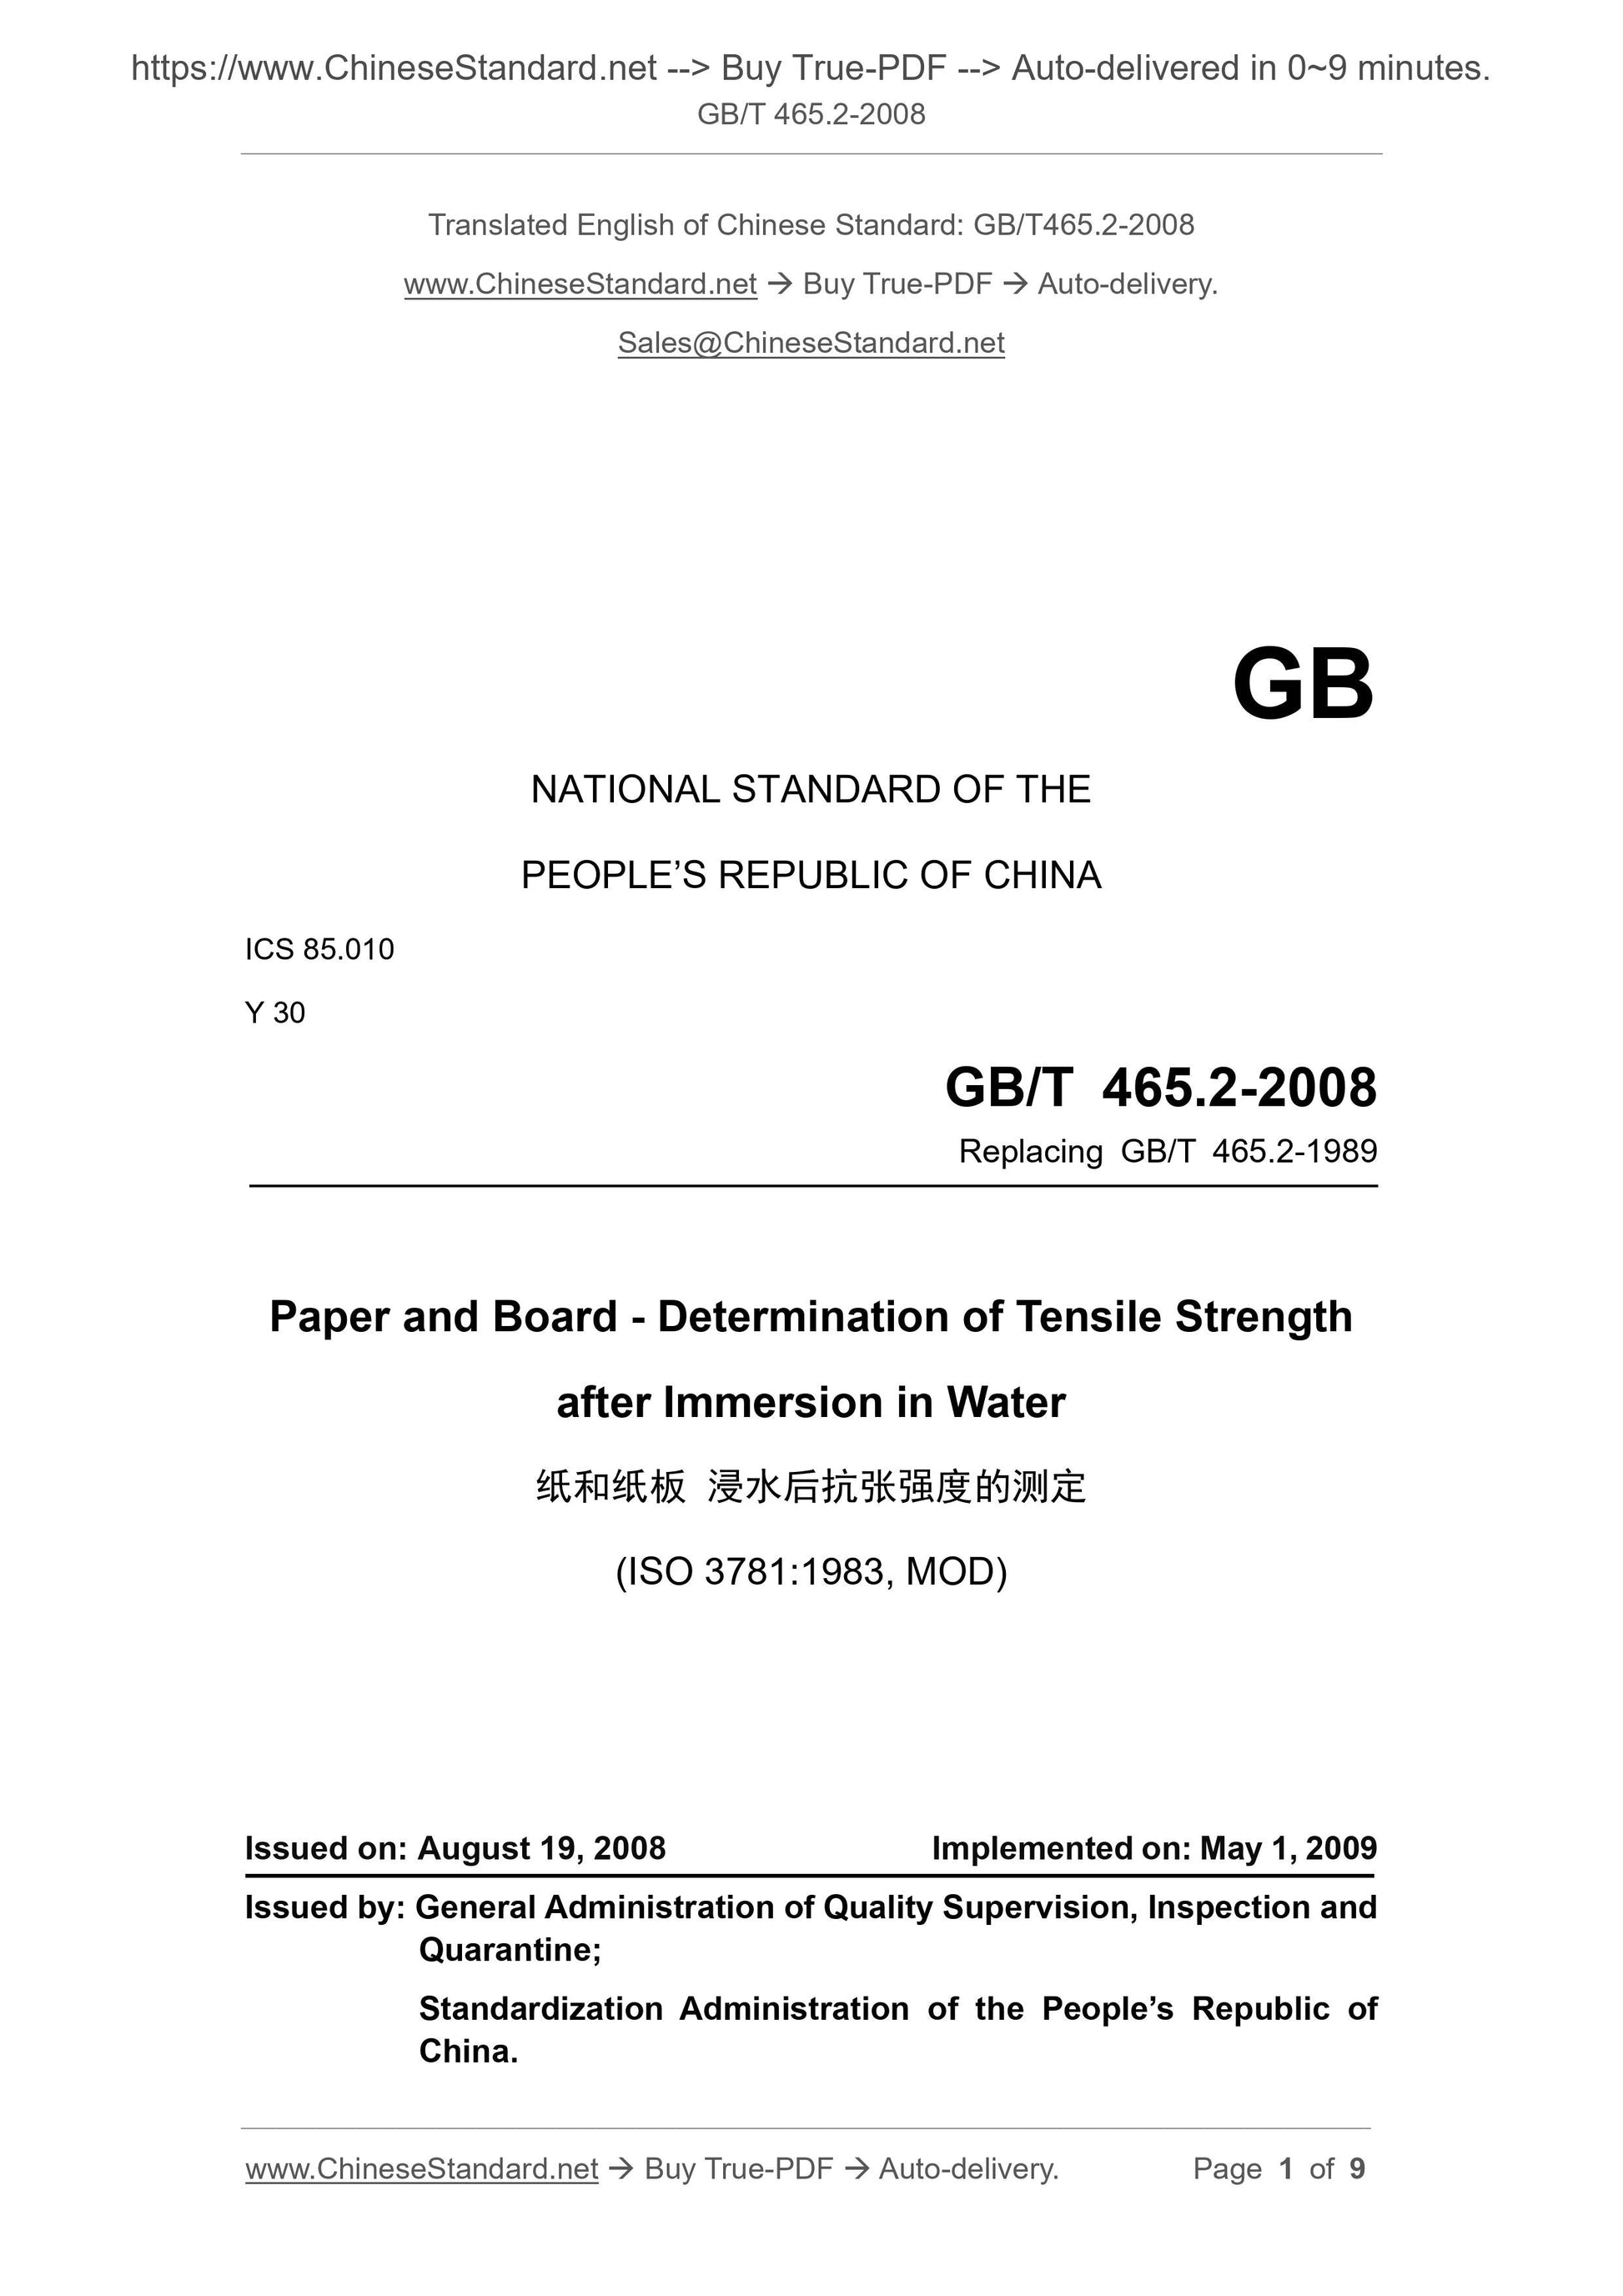 GB/T 465.2-2008 Page 1